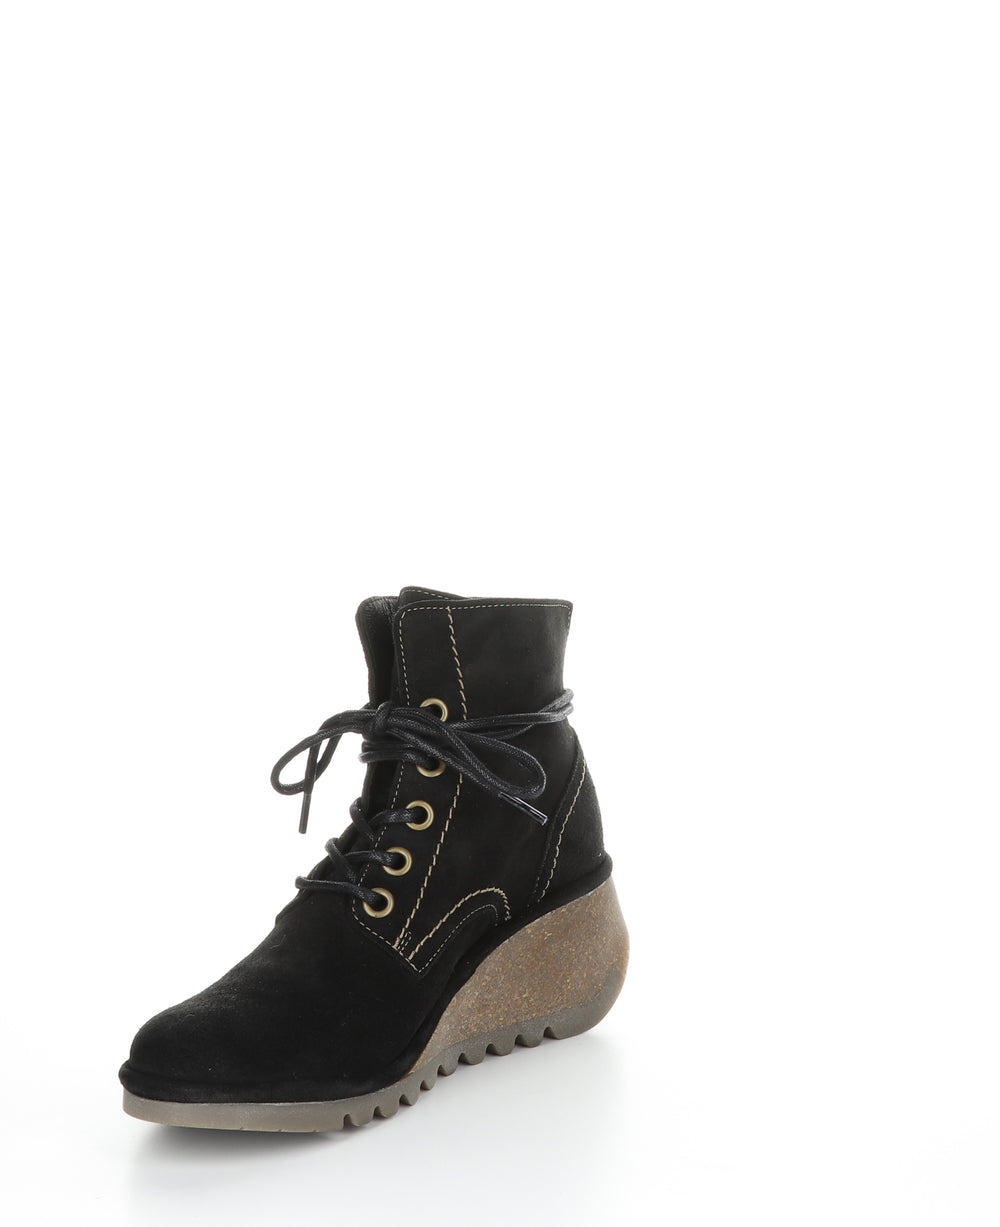 NERO257FLY Black Round Toe Ankle Boots|NERO257FLY Bottines à Bout Rond in Noir